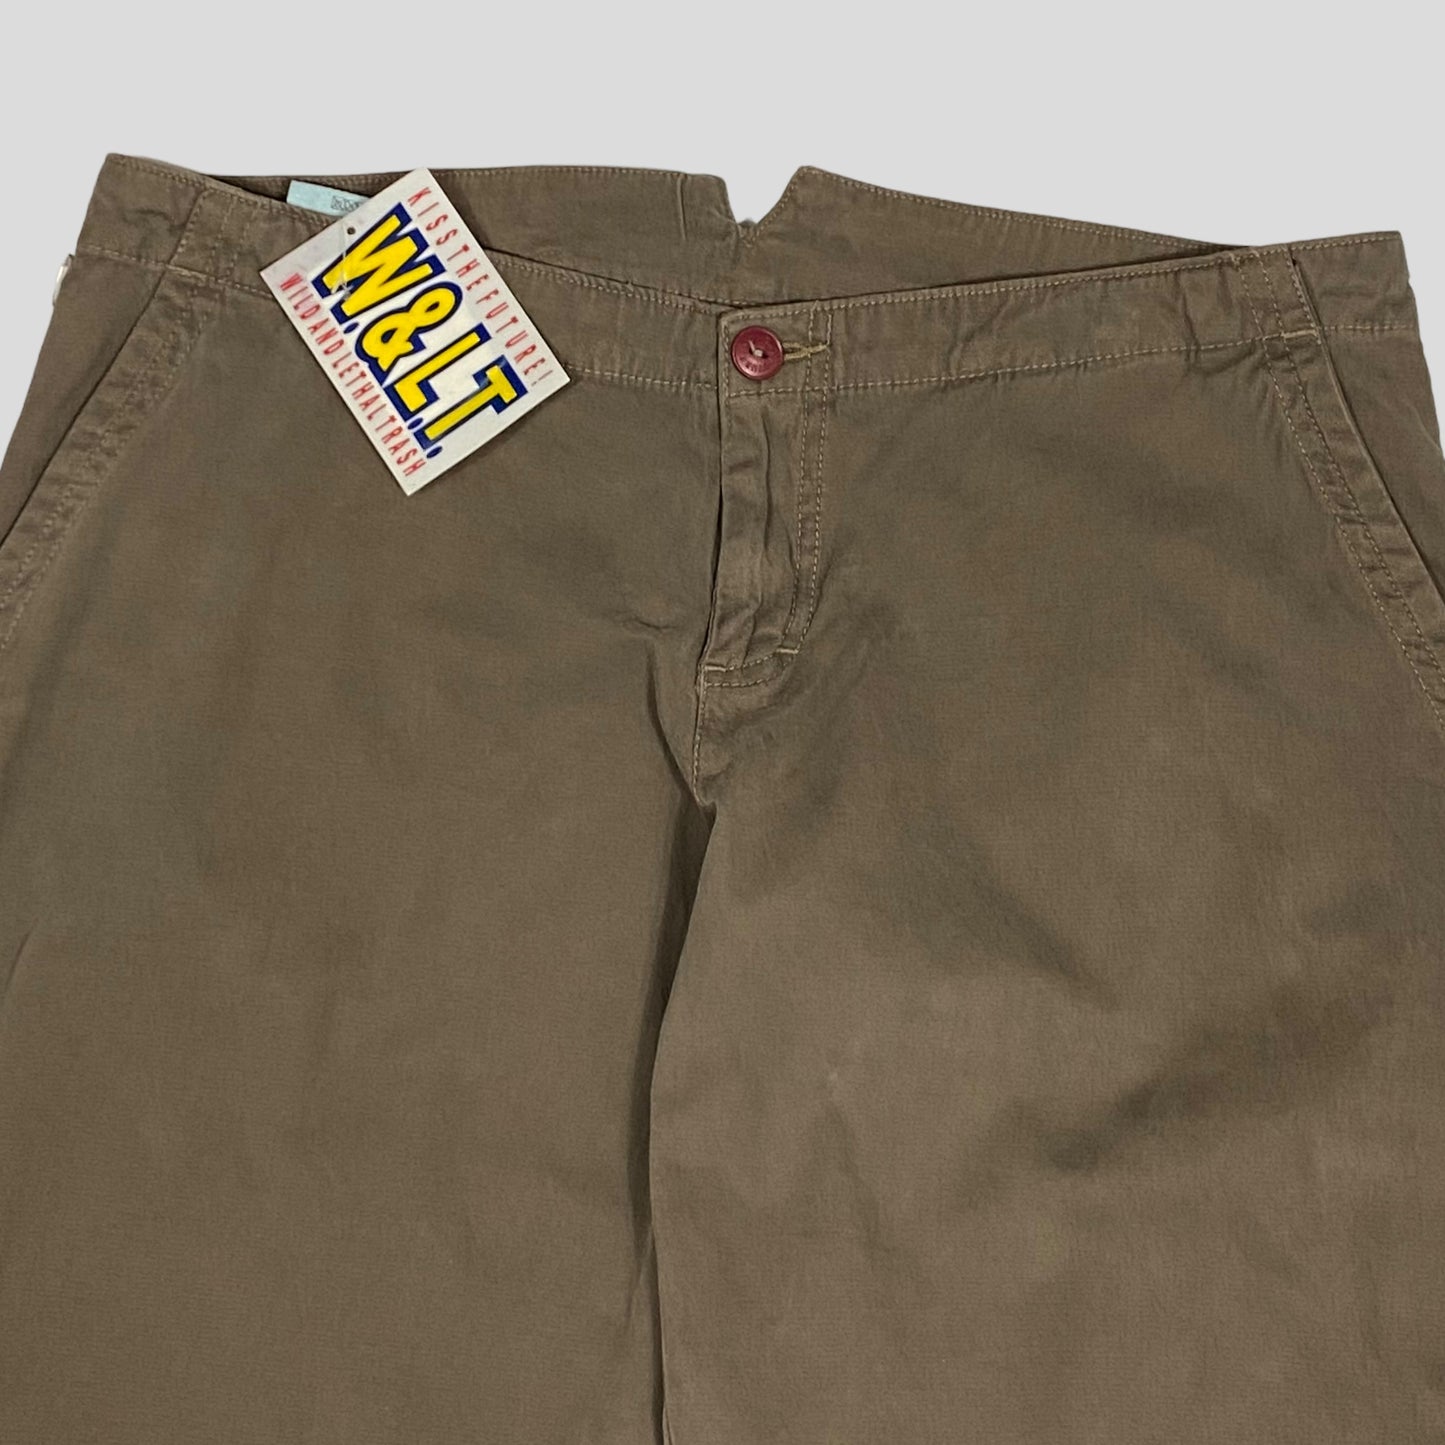 W+LT 2003 Baggy Fit Darted Trousers - 32-35